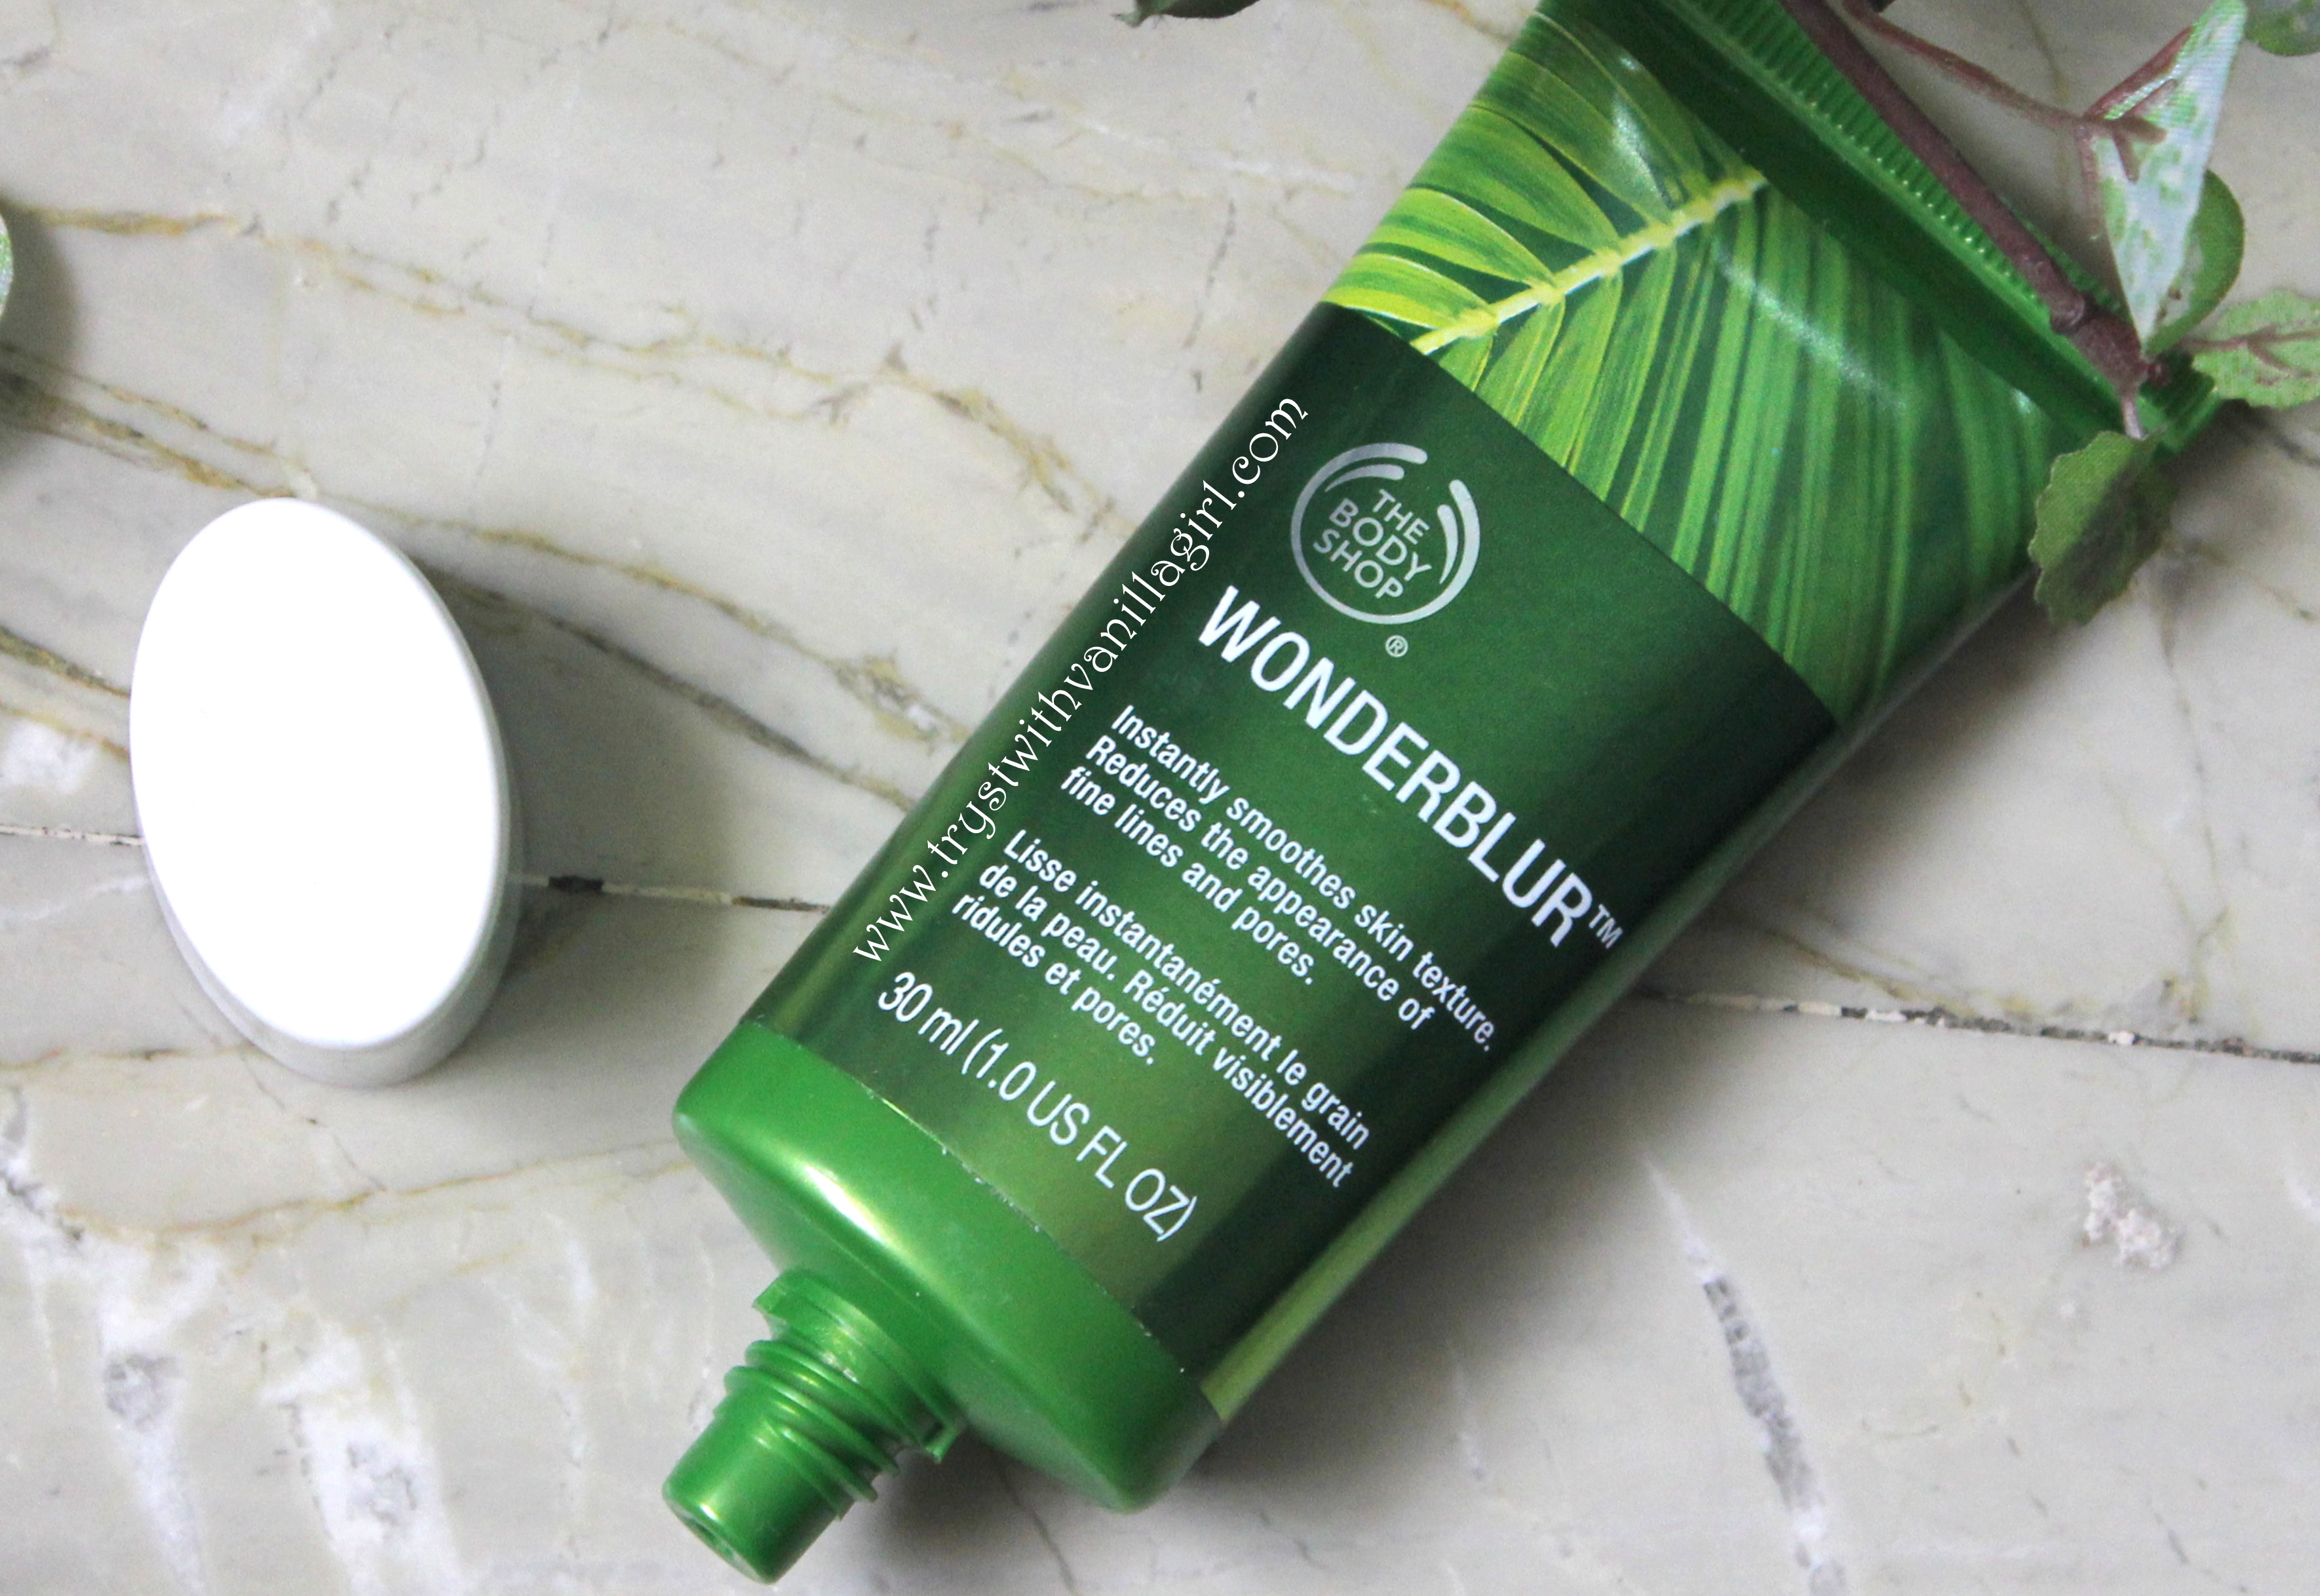 The Body Shop WONDERBLUR Review, Price, Buy Online